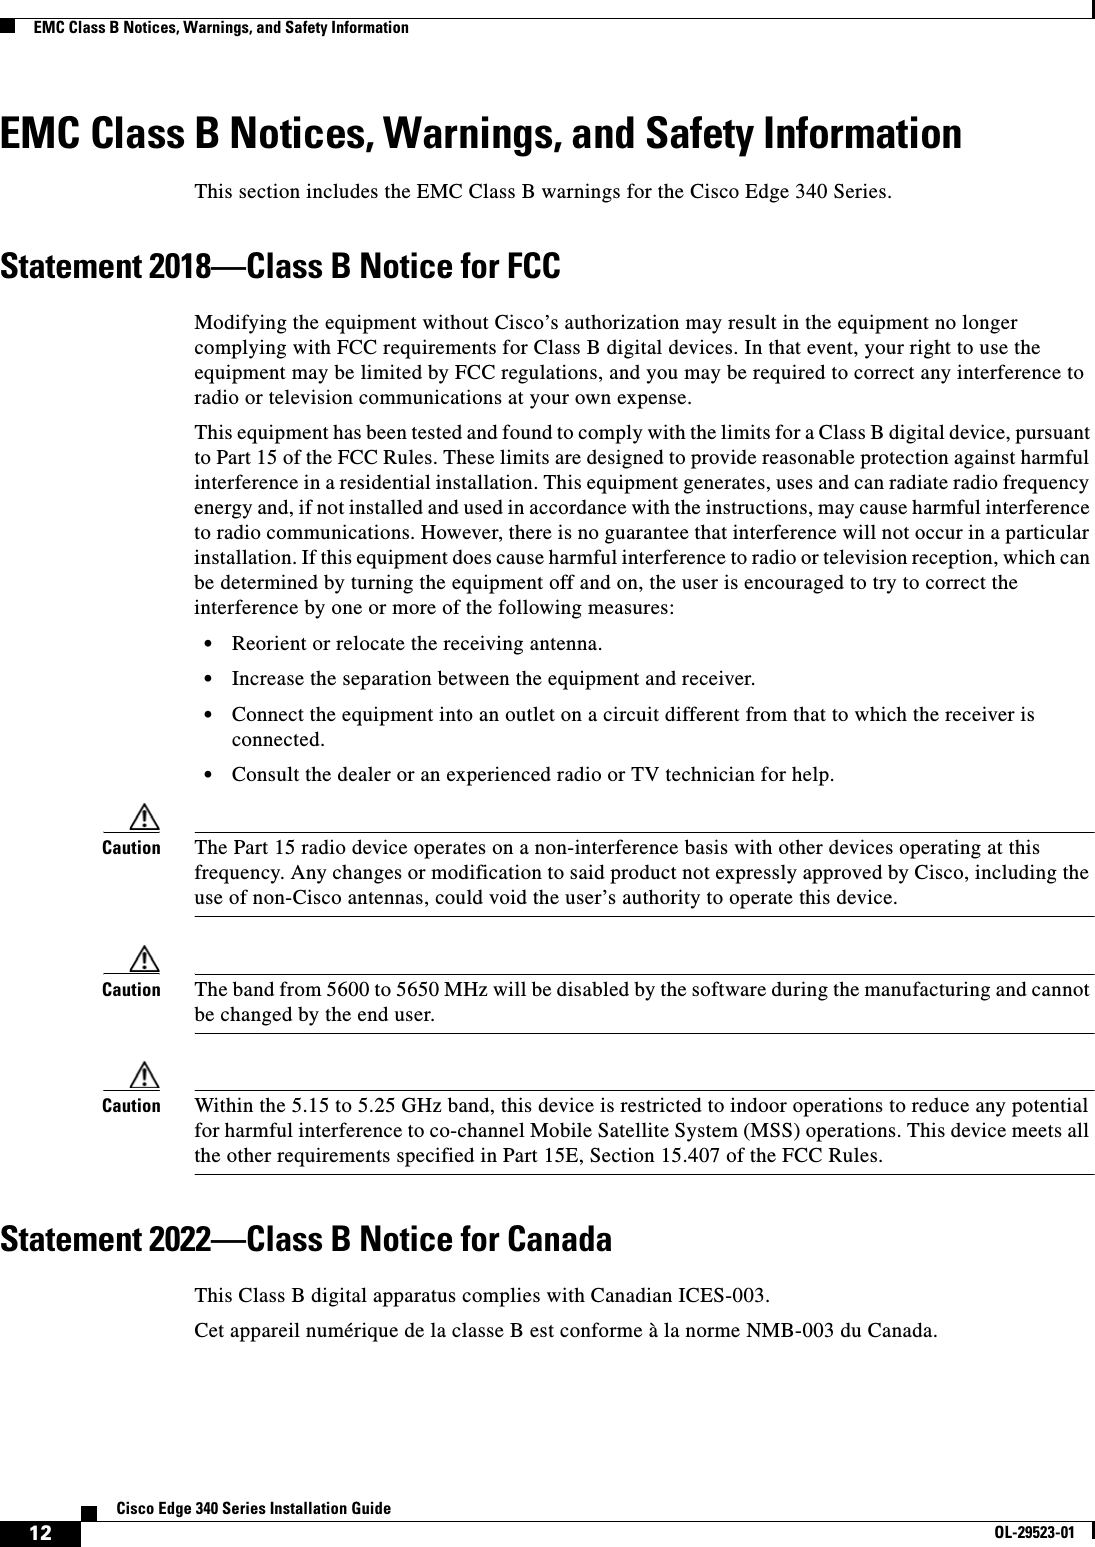  12Cisco Edge 340 Series Installation GuideOL-29523-01EMC Class B Notices, Warnings, and Safety InformationEMC Class B Notices, Warnings, and Safety InformationThis section includes the EMC Class B warnings for the Cisco Edge 340 Series.Statement 2018—Class B Notice for FCCModifying the equipment without Cisco’s authorization may result in the equipment no longer complying with FCC requirements for Class B digital devices. In that event, your right to use the equipment may be limited by FCC regulations, and you may be required to correct any interference to radio or television communications at your own expense.This equipment has been tested and found to comply with the limits for a Class B digital device, pursuant to Part 15 of the FCC Rules. These limits are designed to provide reasonable protection against harmful interference in a residential installation. This equipment generates, uses and can radiate radio frequency energy and, if not installed and used in accordance with the instructions, may cause harmful interference to radio communications. However, there is no guarantee that interference will not occur in a particular installation. If this equipment does cause harmful interference to radio or television reception, which can be determined by turning the equipment off and on, the user is encouraged to try to correct the interference by one or more of the following measures:   • Reorient or relocate the receiving antenna.   • Increase the separation between the equipment and receiver.  • Connect the equipment into an outlet on a circuit different from that to which the receiver is connected.  • Consult the dealer or an experienced radio or TV technician for help. Caution The Part 15 radio device operates on a non-interference basis with other devices operating at this frequency. Any changes or modification to said product not expressly approved by Cisco, including the use of non-Cisco antennas, could void the user’s authority to operate this device. Caution The band from 5600 to 5650 MHz will be disabled by the software during the manufacturing and cannot be changed by the end user. Caution Within the 5.15 to 5.25 GHz band, this device is restricted to indoor operations to reduce any potential for harmful interference to co-channel Mobile Satellite System (MSS) operations. This device meets all the other requirements specified in Part 15E, Section 15.407 of the FCC Rules. Statement 2022—Class B Notice for CanadaThis Class B digital apparatus complies with Canadian ICES-003.Cet appareil numérique de la classe B est conforme à la norme NMB-003 du Canada.